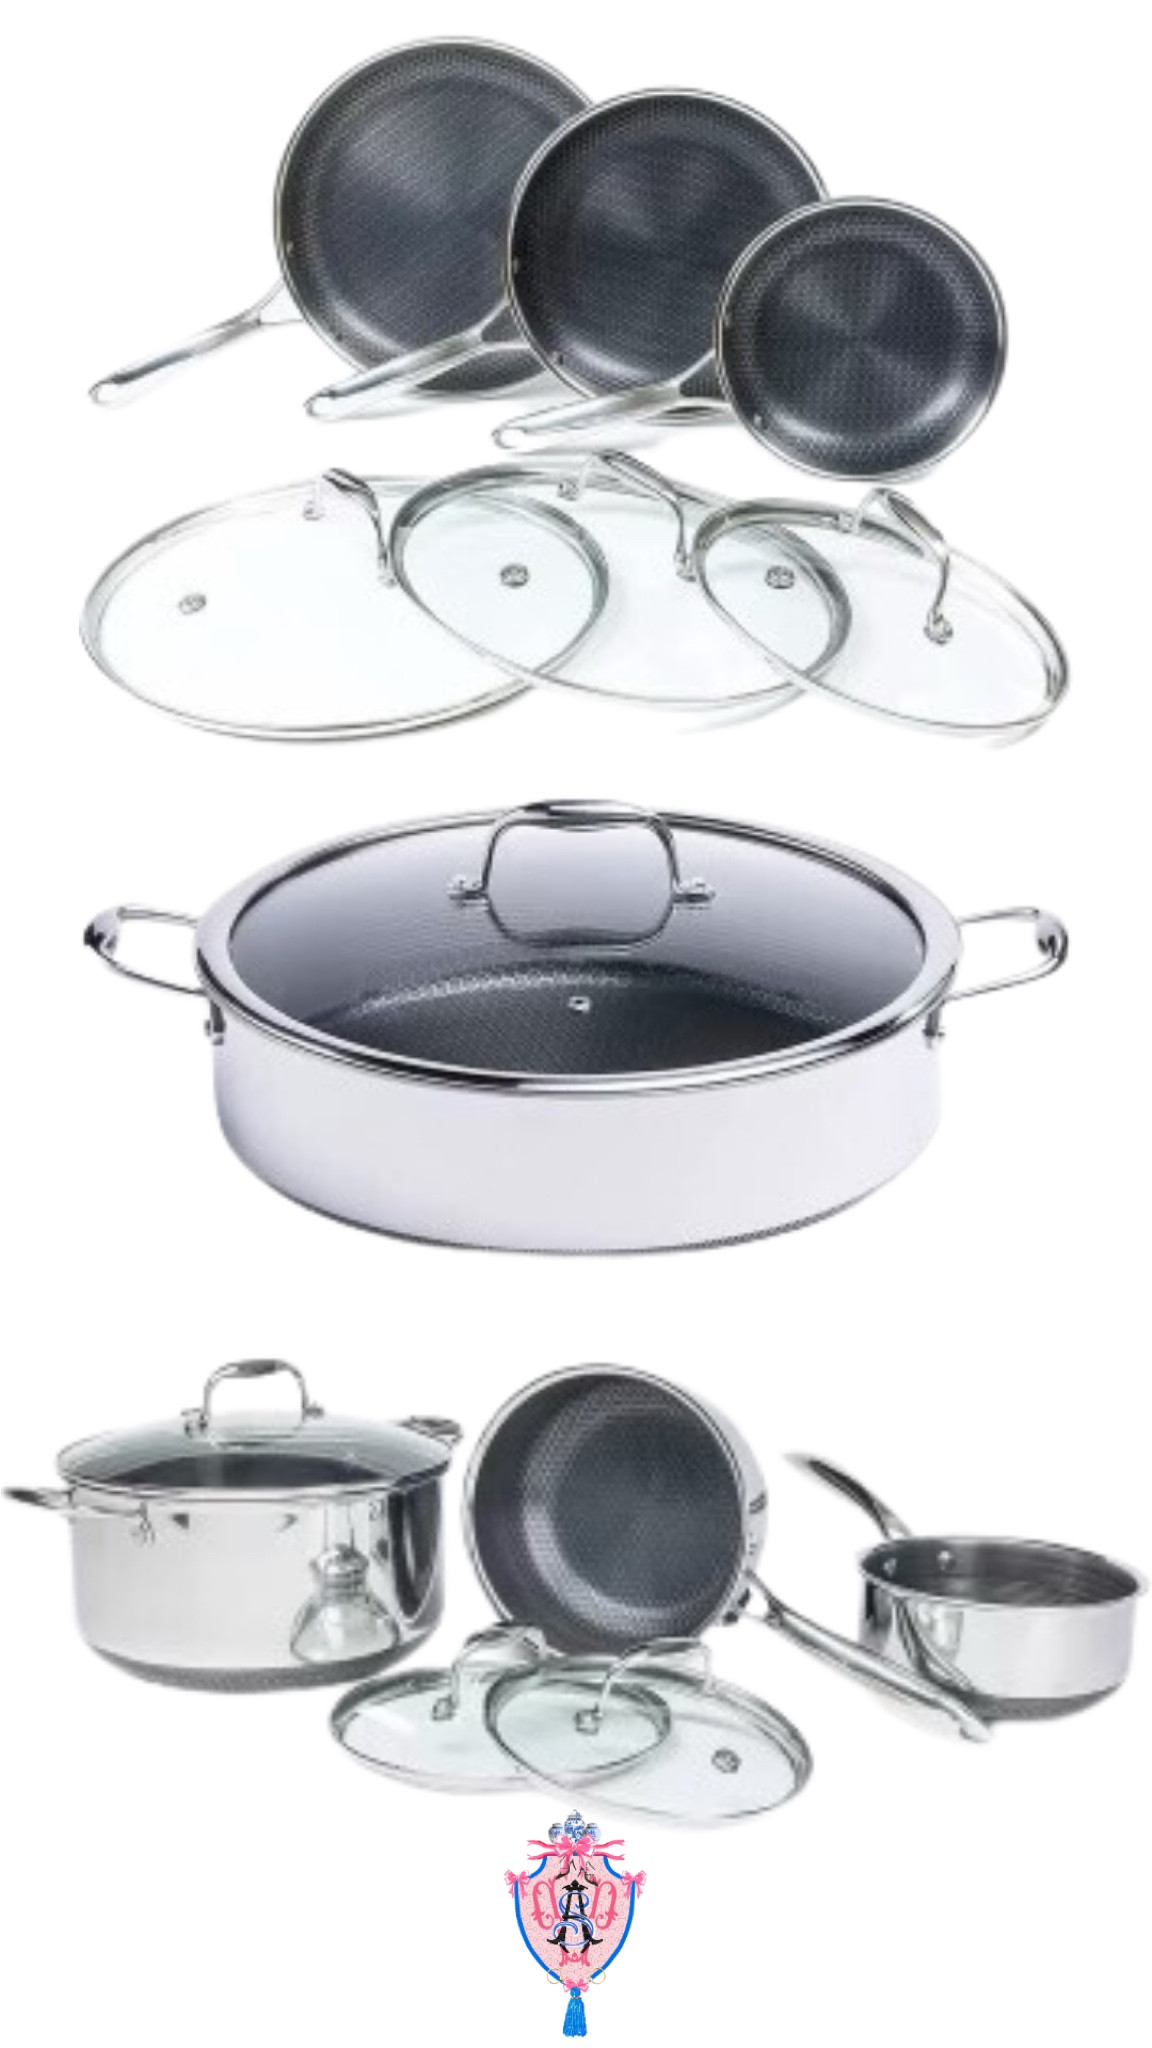 Hexclad Hybrid Cookware Set Just Like Home Non Stick Toy Cookware